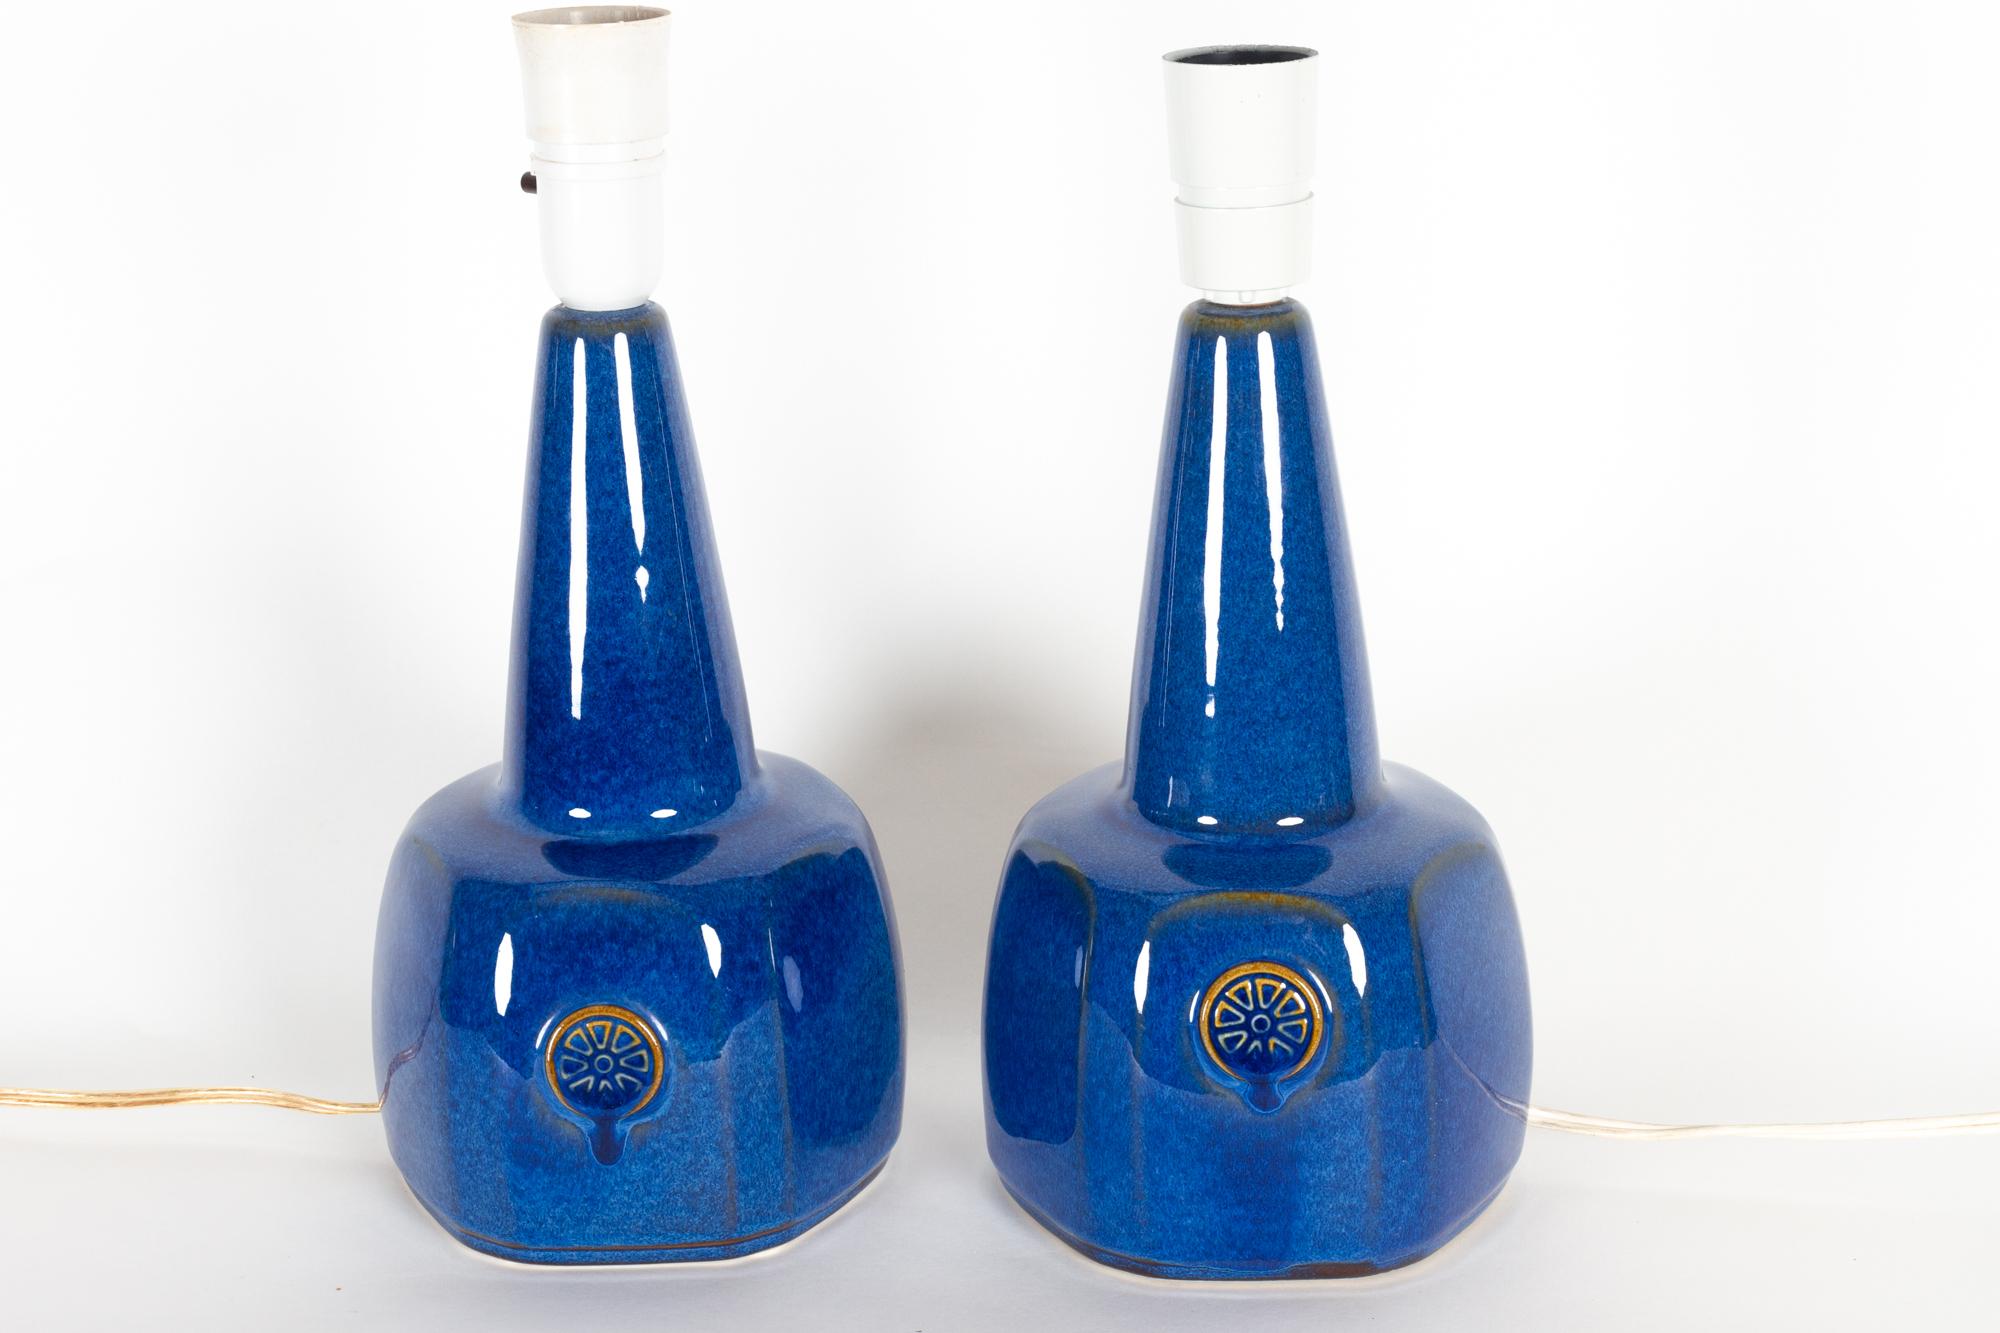 Danish ceramic table lamps by Einar Johansen for Søholm 1960s, set of 2
Pair of lamps and in blue running glaze from Søholm ceramics on the isle of Bornholm. With the northern light motif designed by Maria Philippi. Rounded hexagonal base with